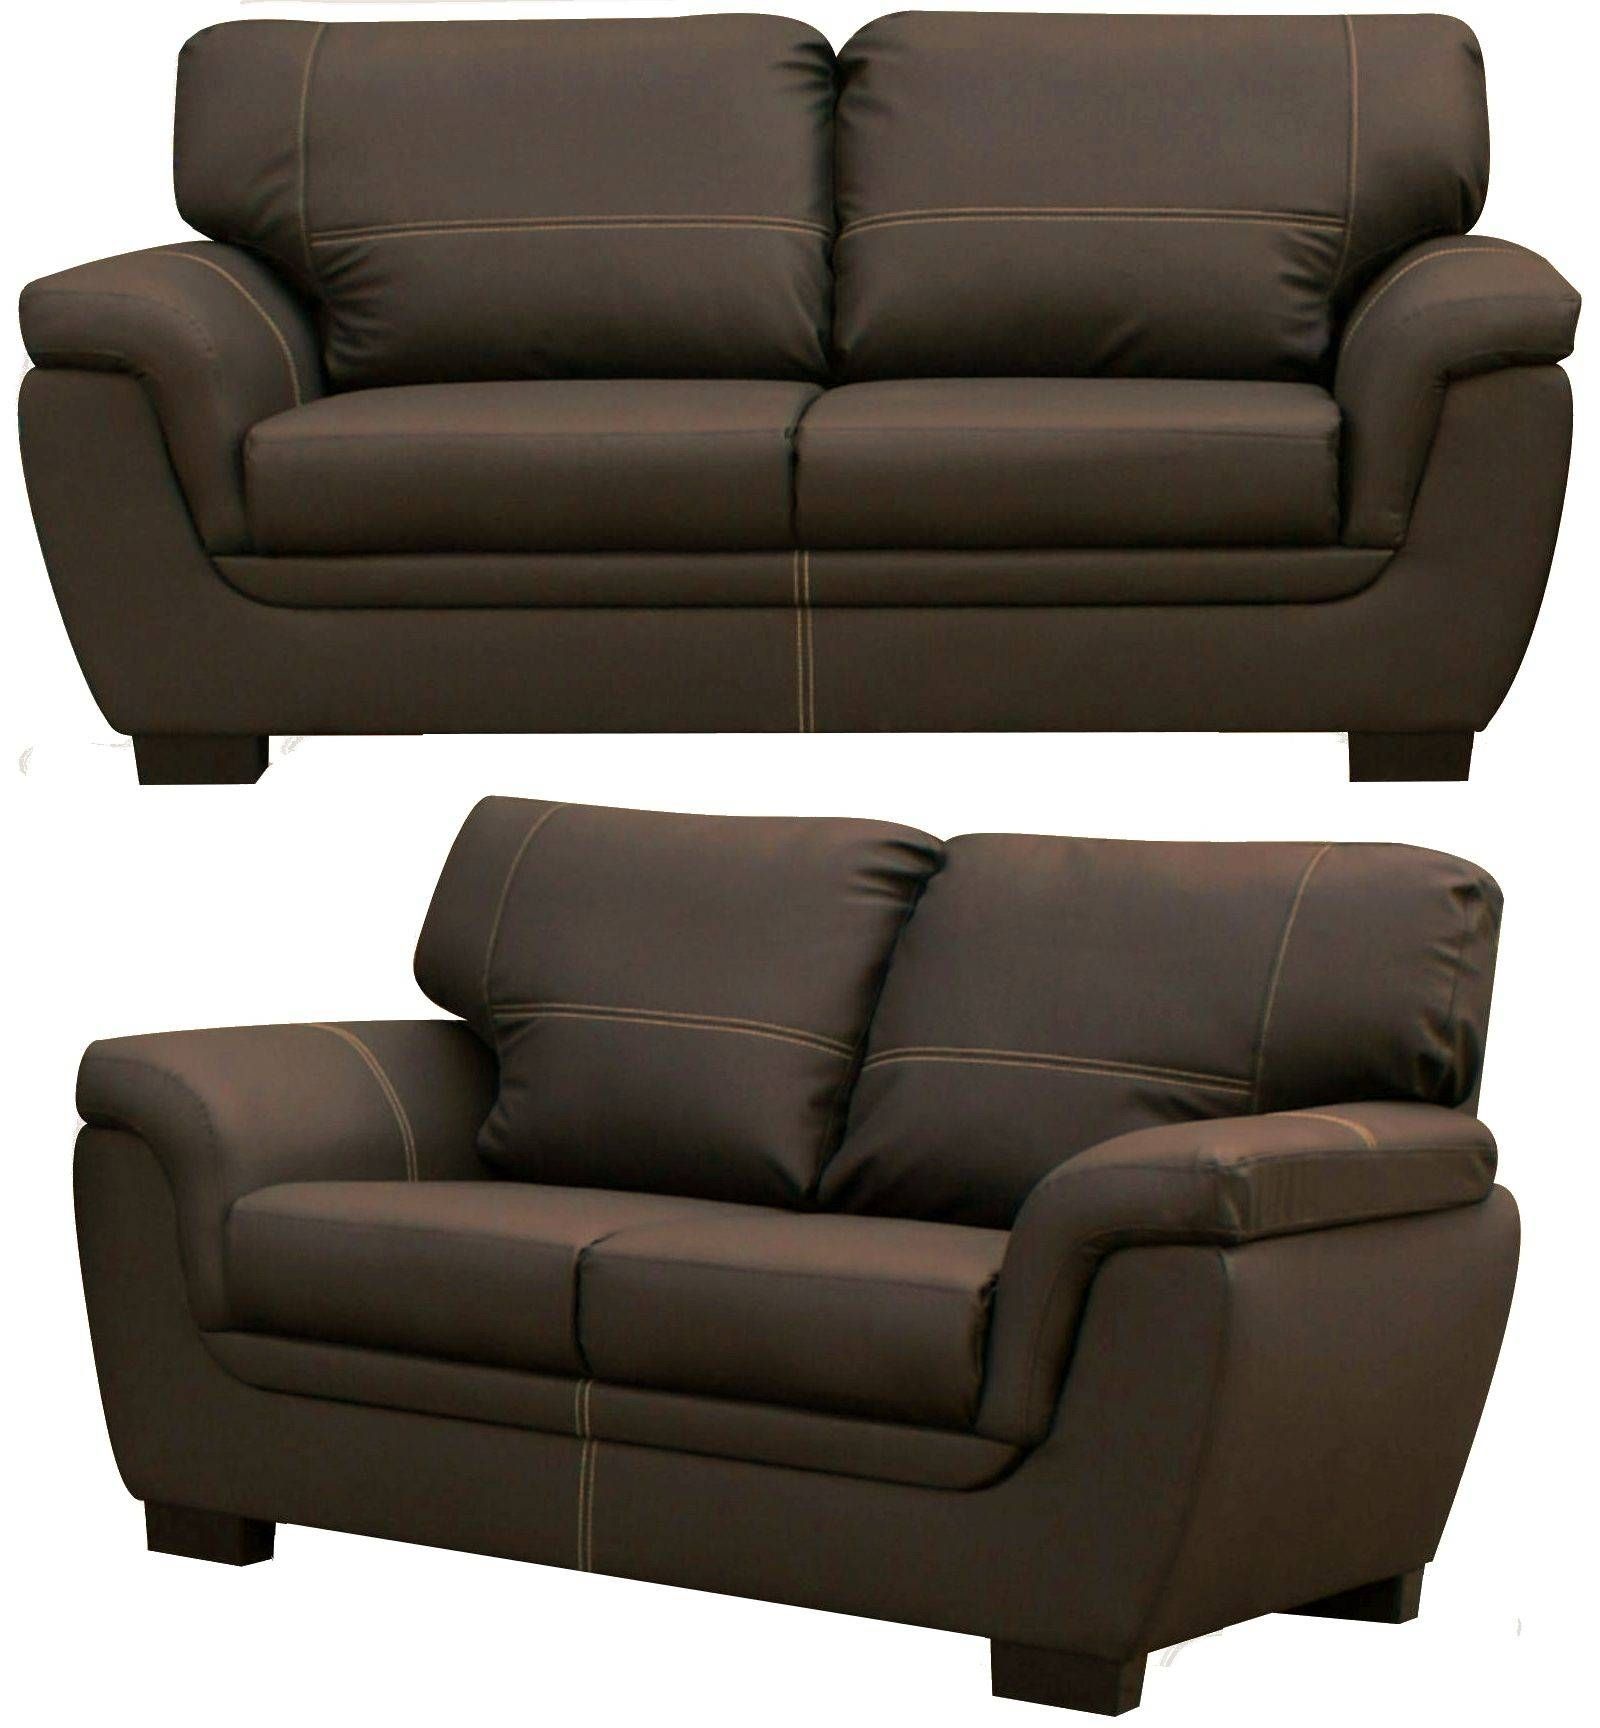 Trend Black Faux Leather Sofa 56 In Sofas And Couches Ideas With For Sofa Trend (View 25 of 25)